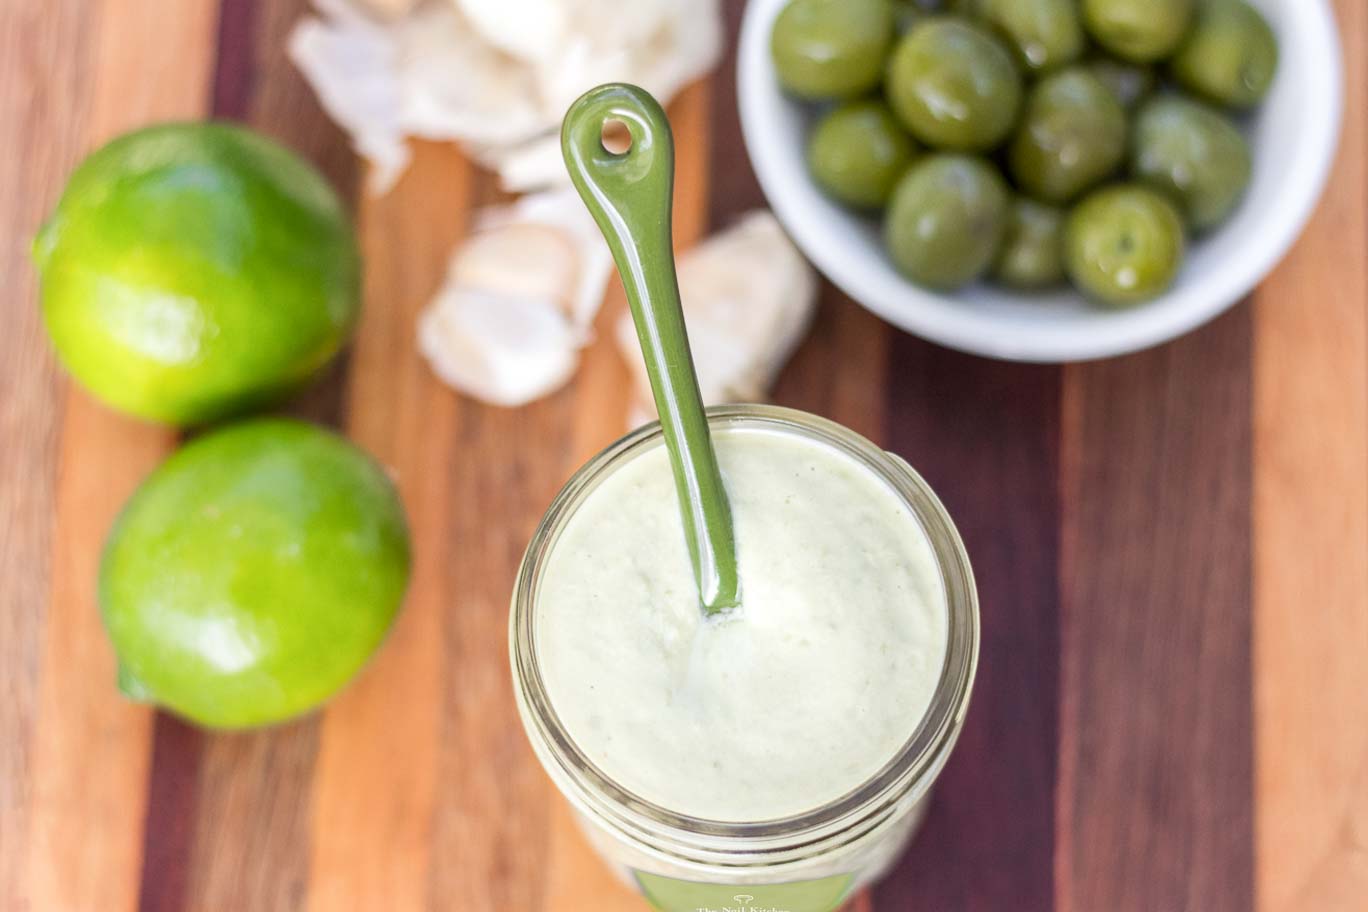 An open jar of “Olivaise” Oil-free Vegan Mayonnaise surrounded by limes, garlic cloves and green olives.